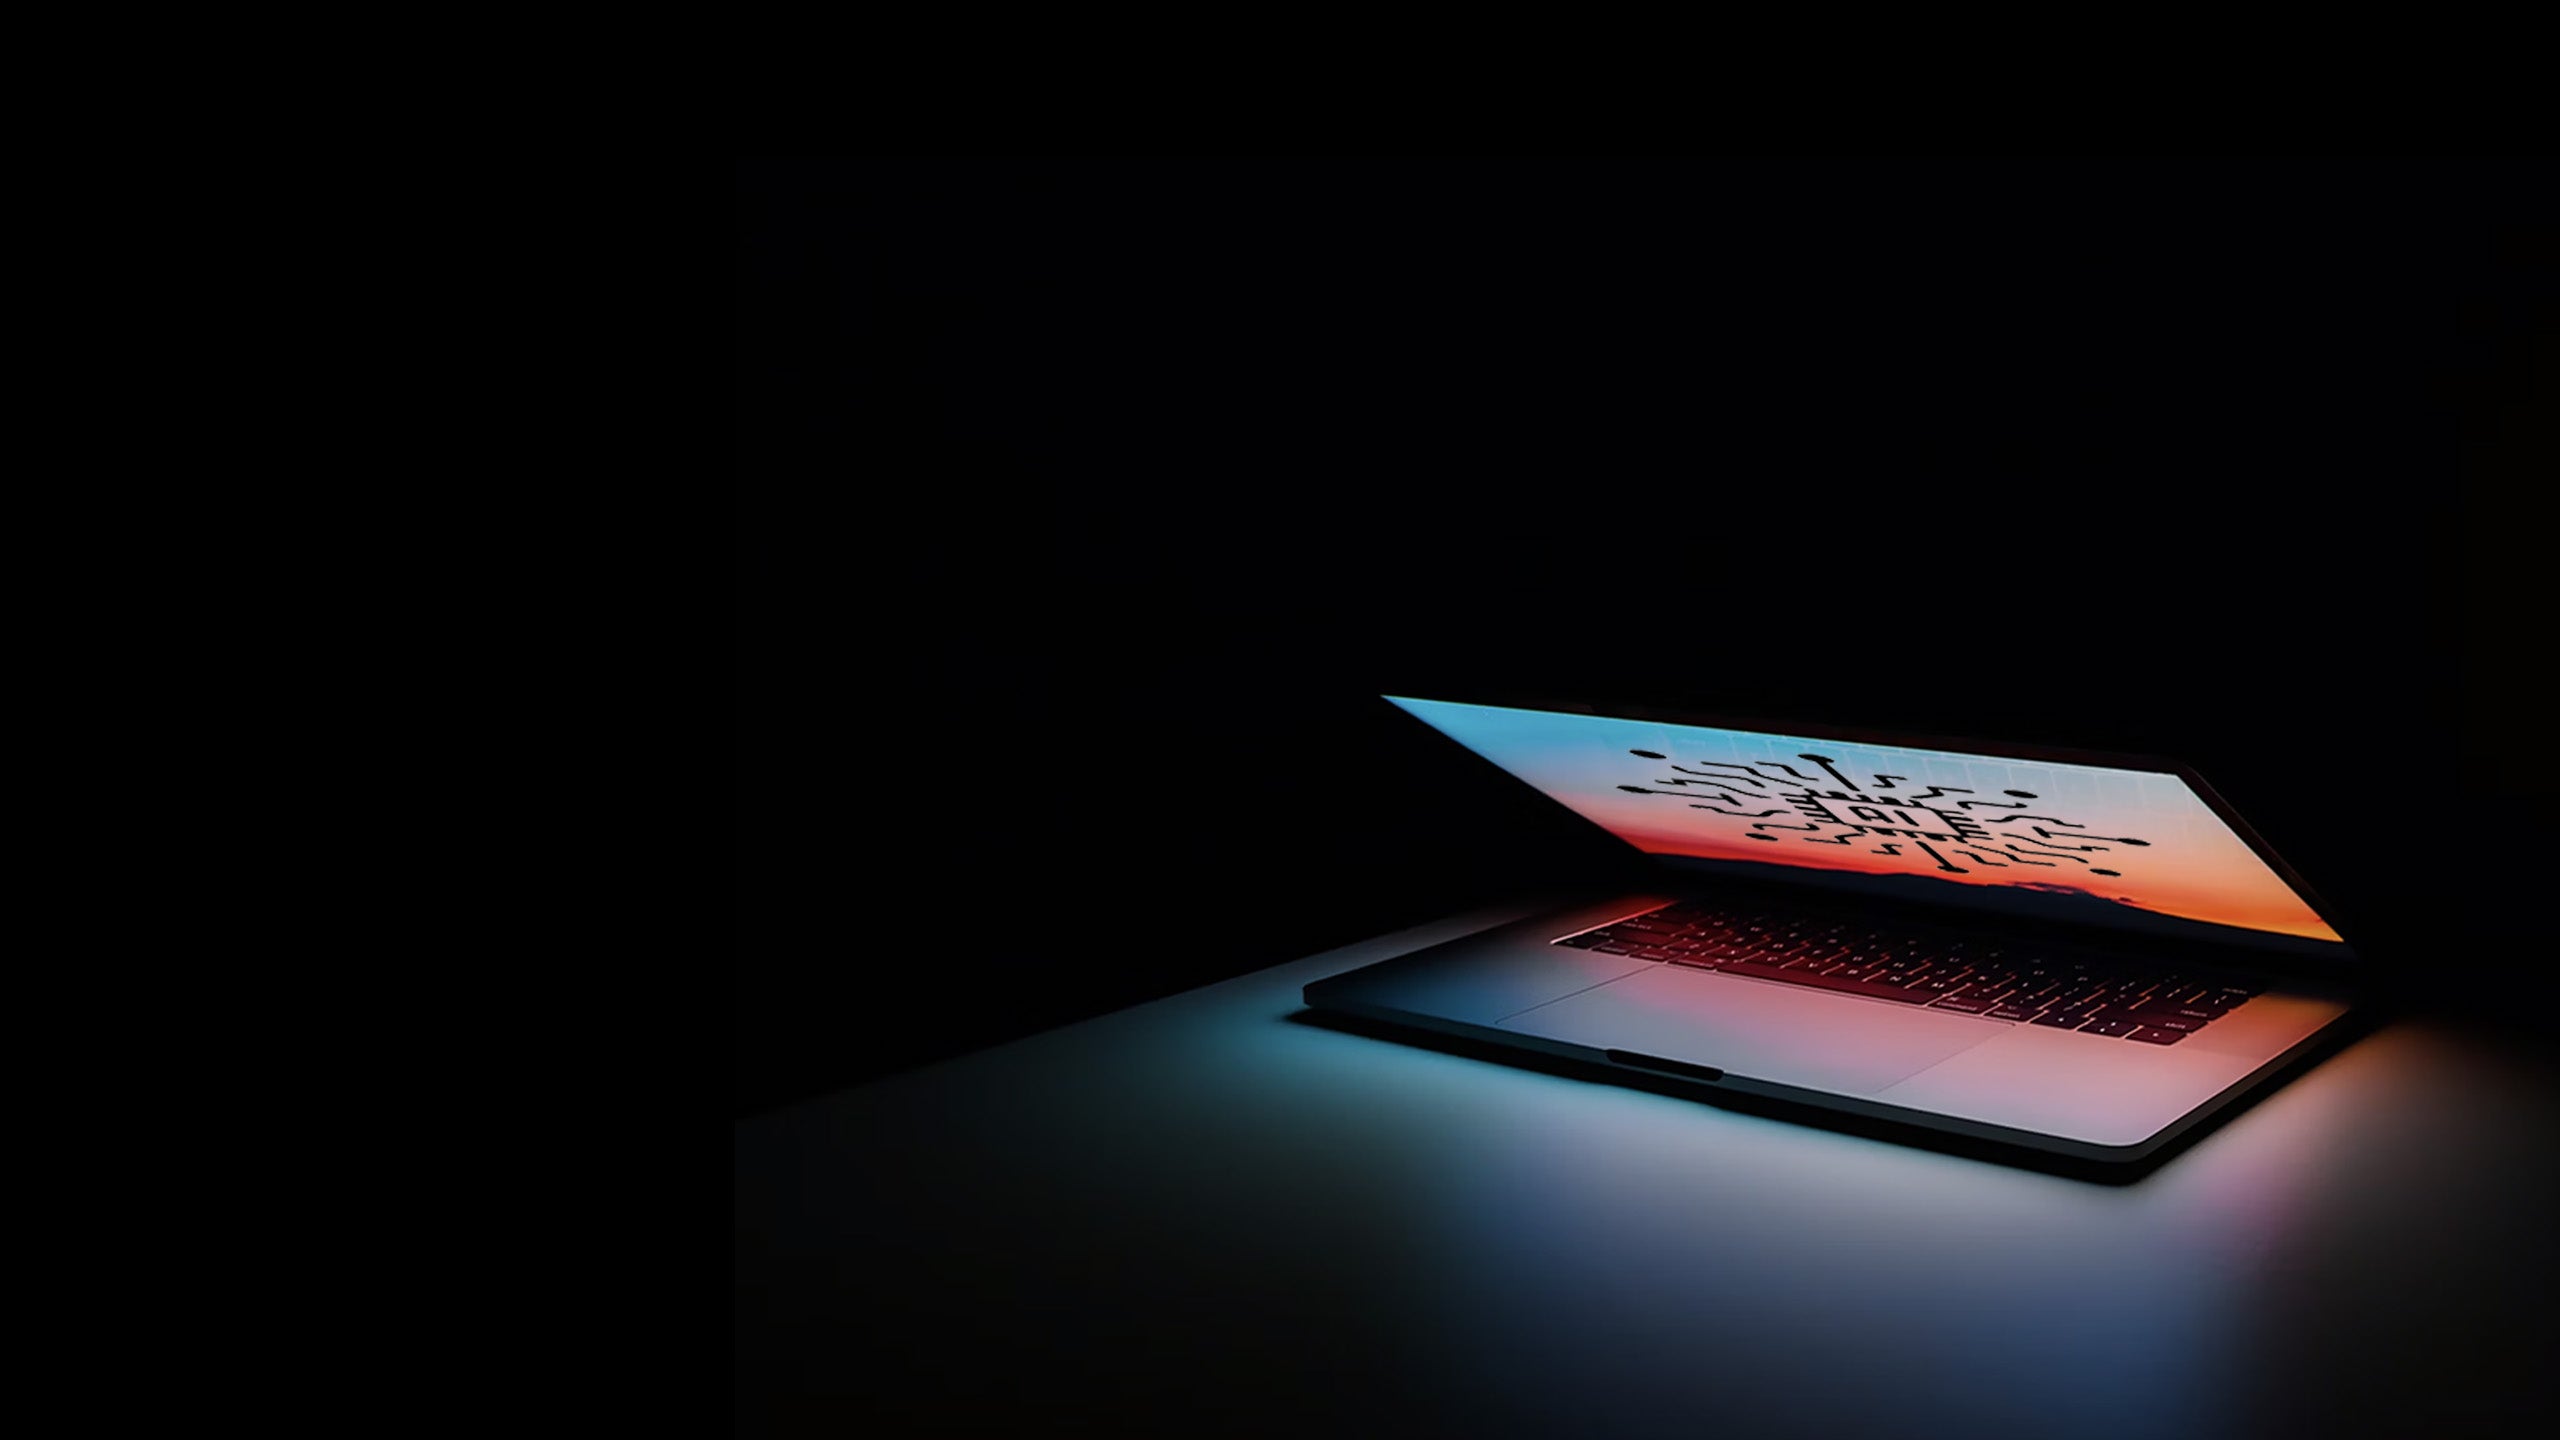 Image of laptop open on a desk.